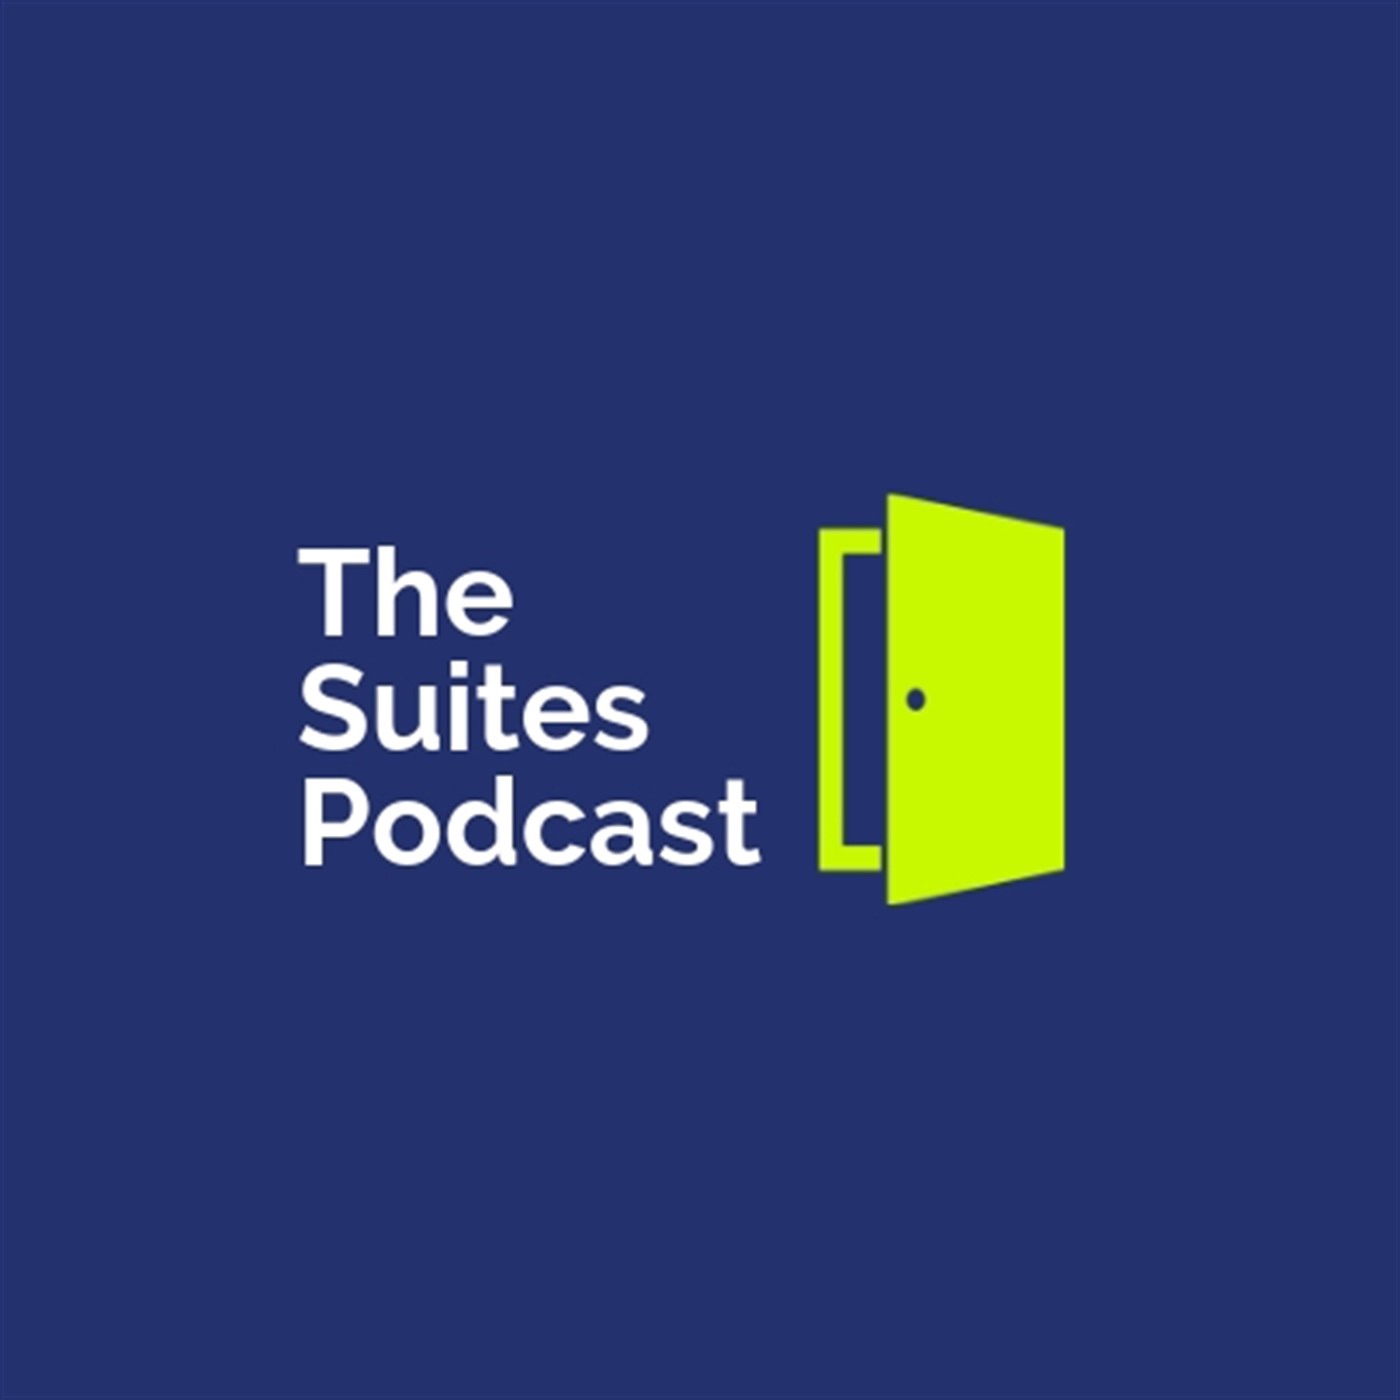 The Suites Podcast